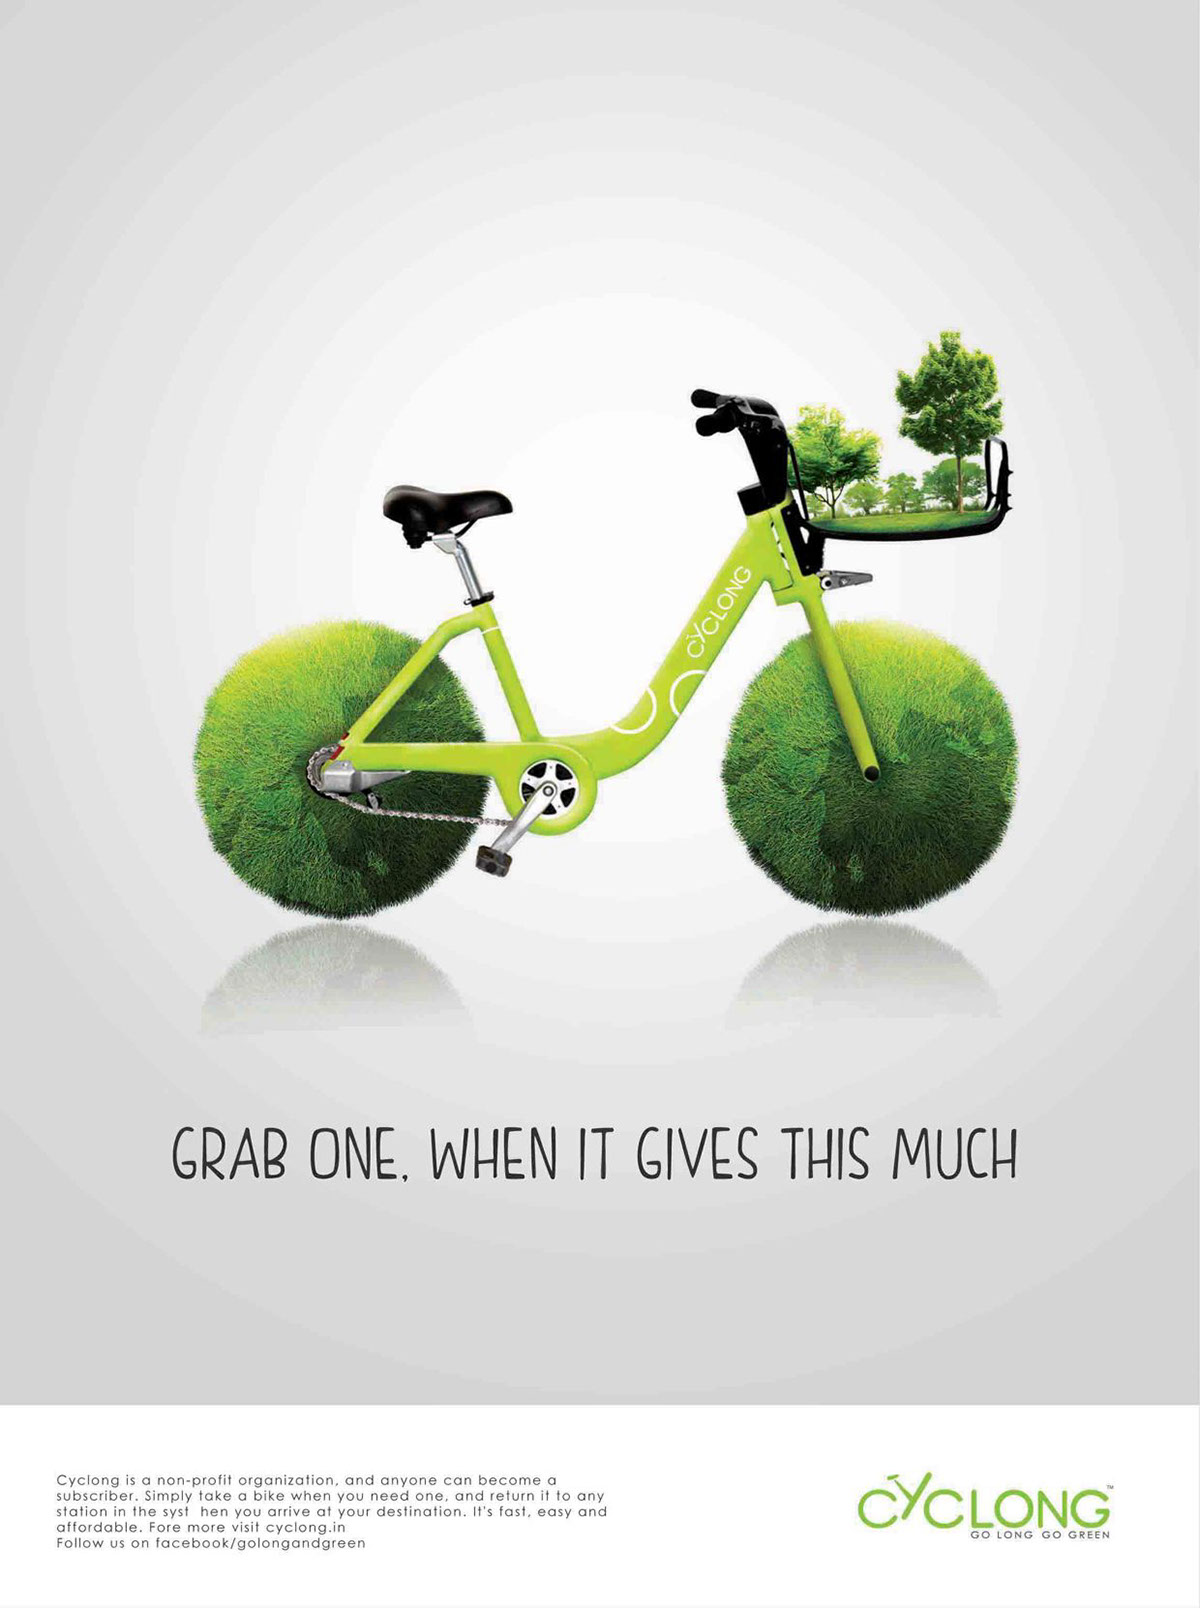 Cycling campaign eco friendly jogging Health Fat Free Save Money save fule save nature traffic free cycle